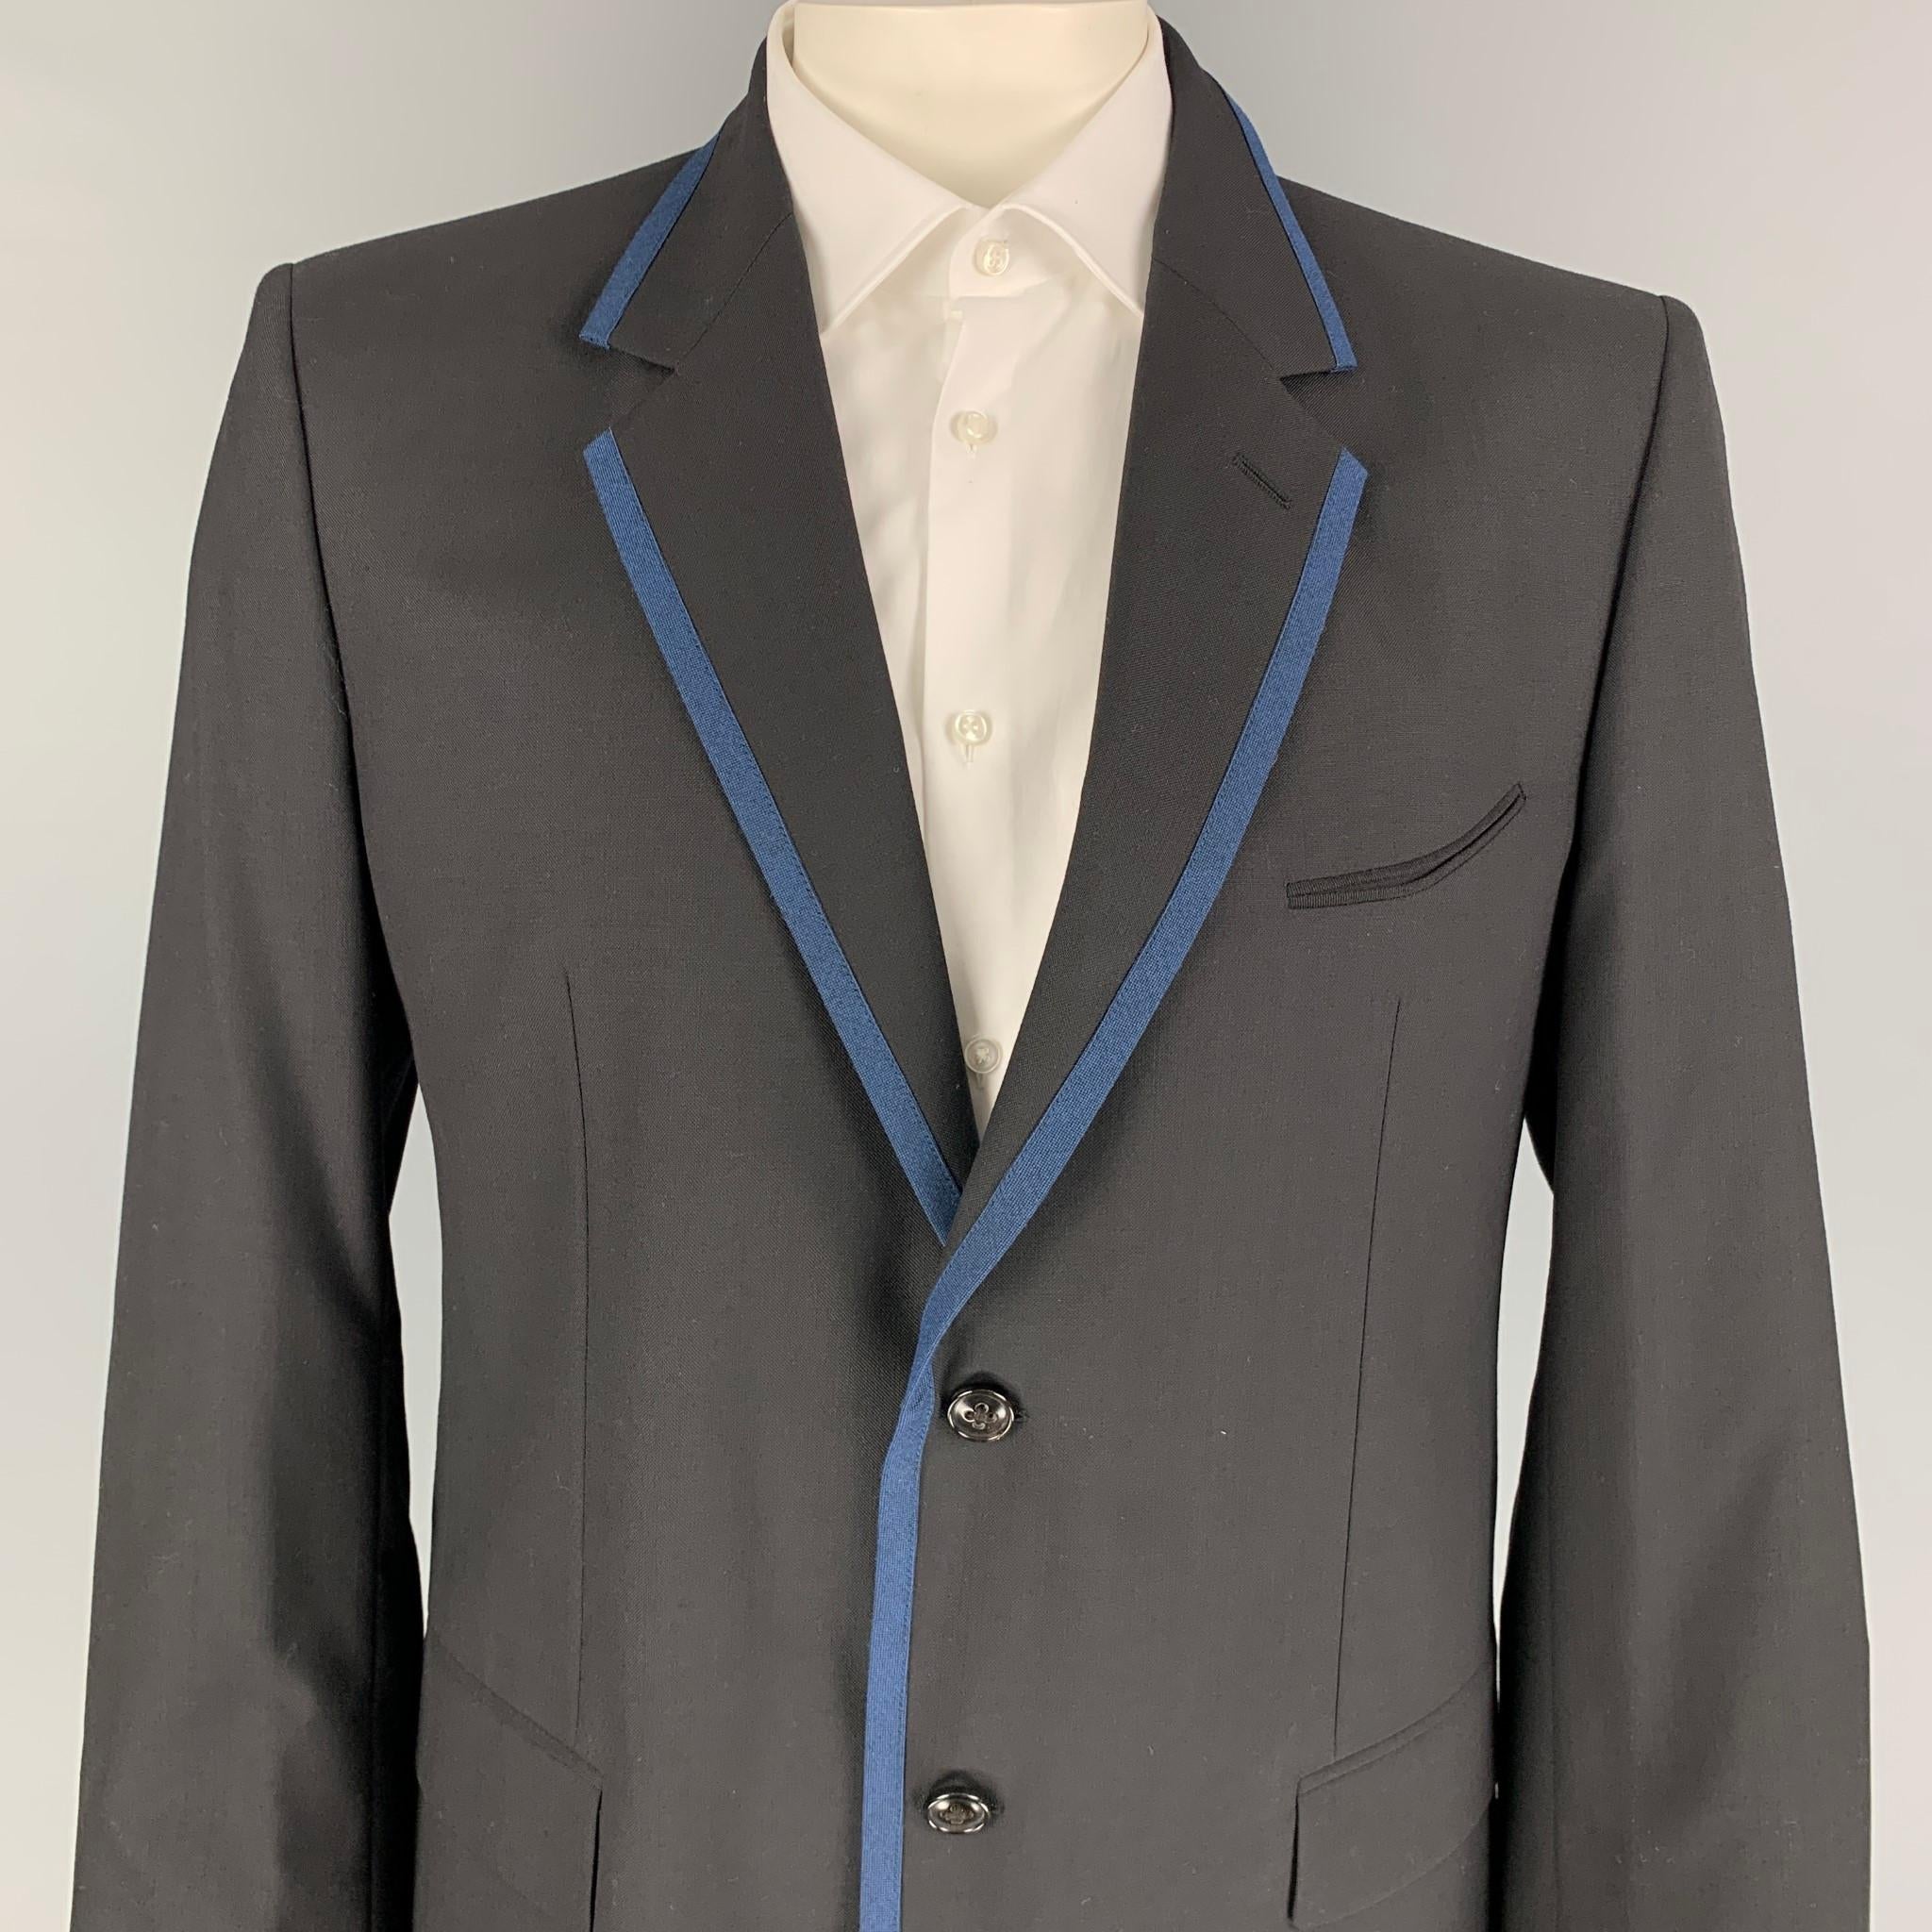 MARC JACOBS sport coat comes in a black wool with a full liner featuring a notch lapel, blue trim, flap pockets, double back vent, and a double button closure. Made in Italy. 

New With Tags. 
Marked: 54

Measurements:

Shoulder: 18.5 in.
Chest: 44